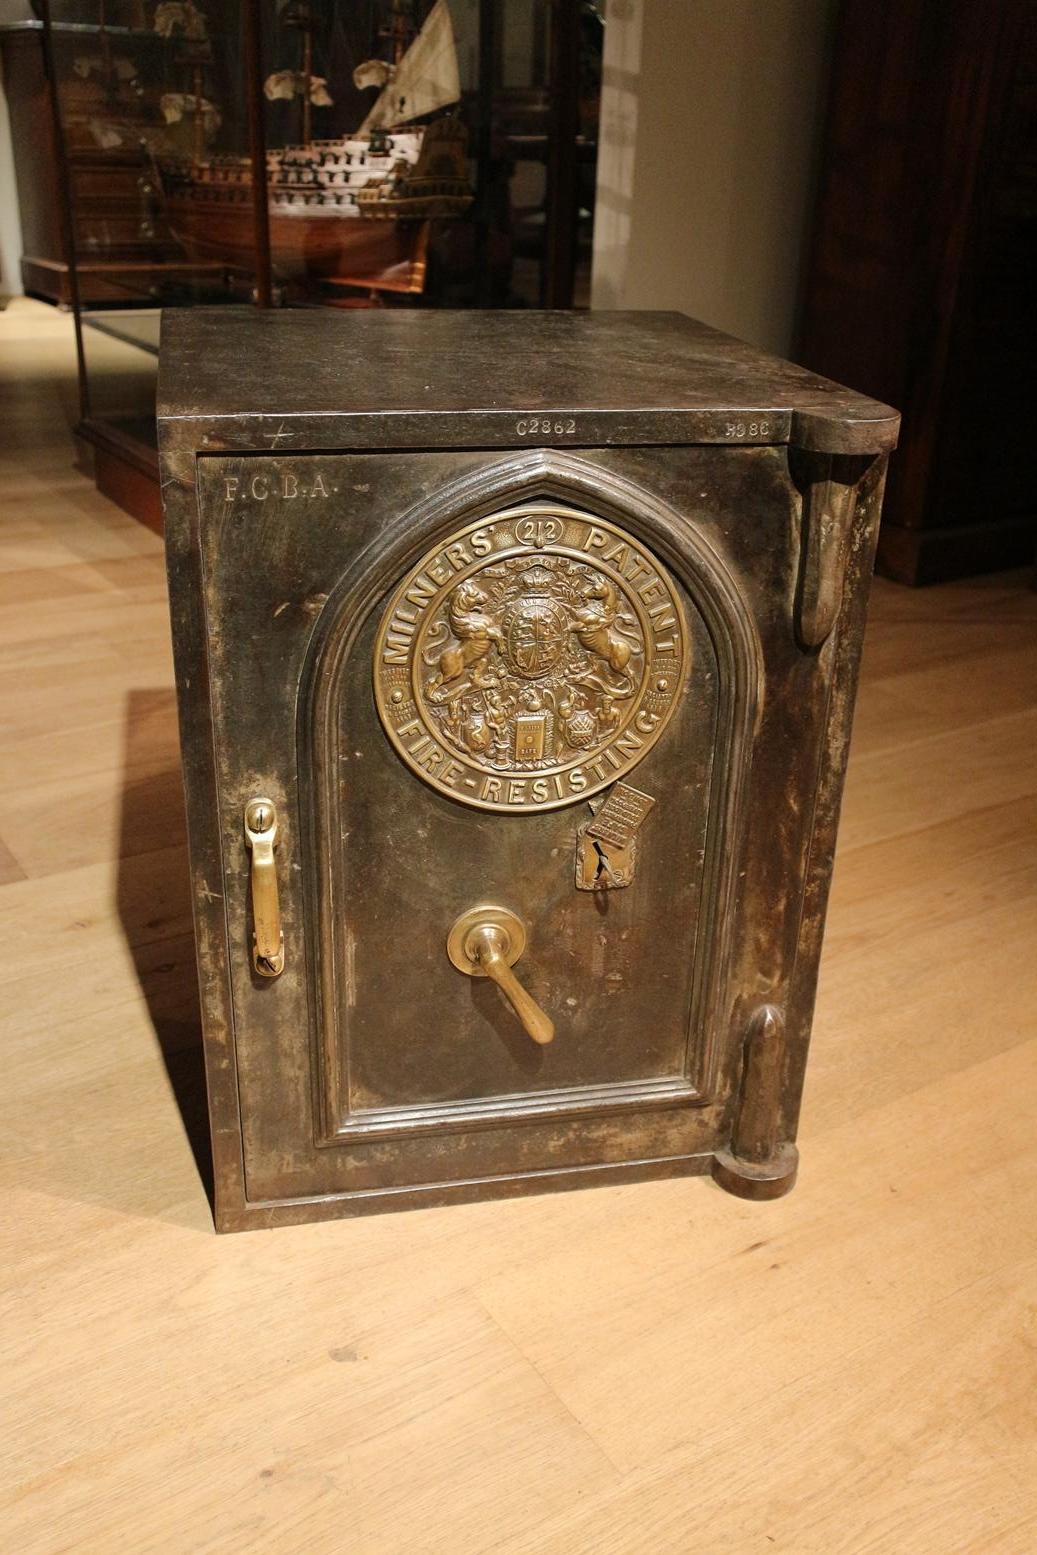 Beautiful antique English safe entirely in original condition and well-working lock. Beautiful aged look It is a safe from the Milner company from Liverpool & London. The special thing about this safe is that it has a powder proof solid lock. This